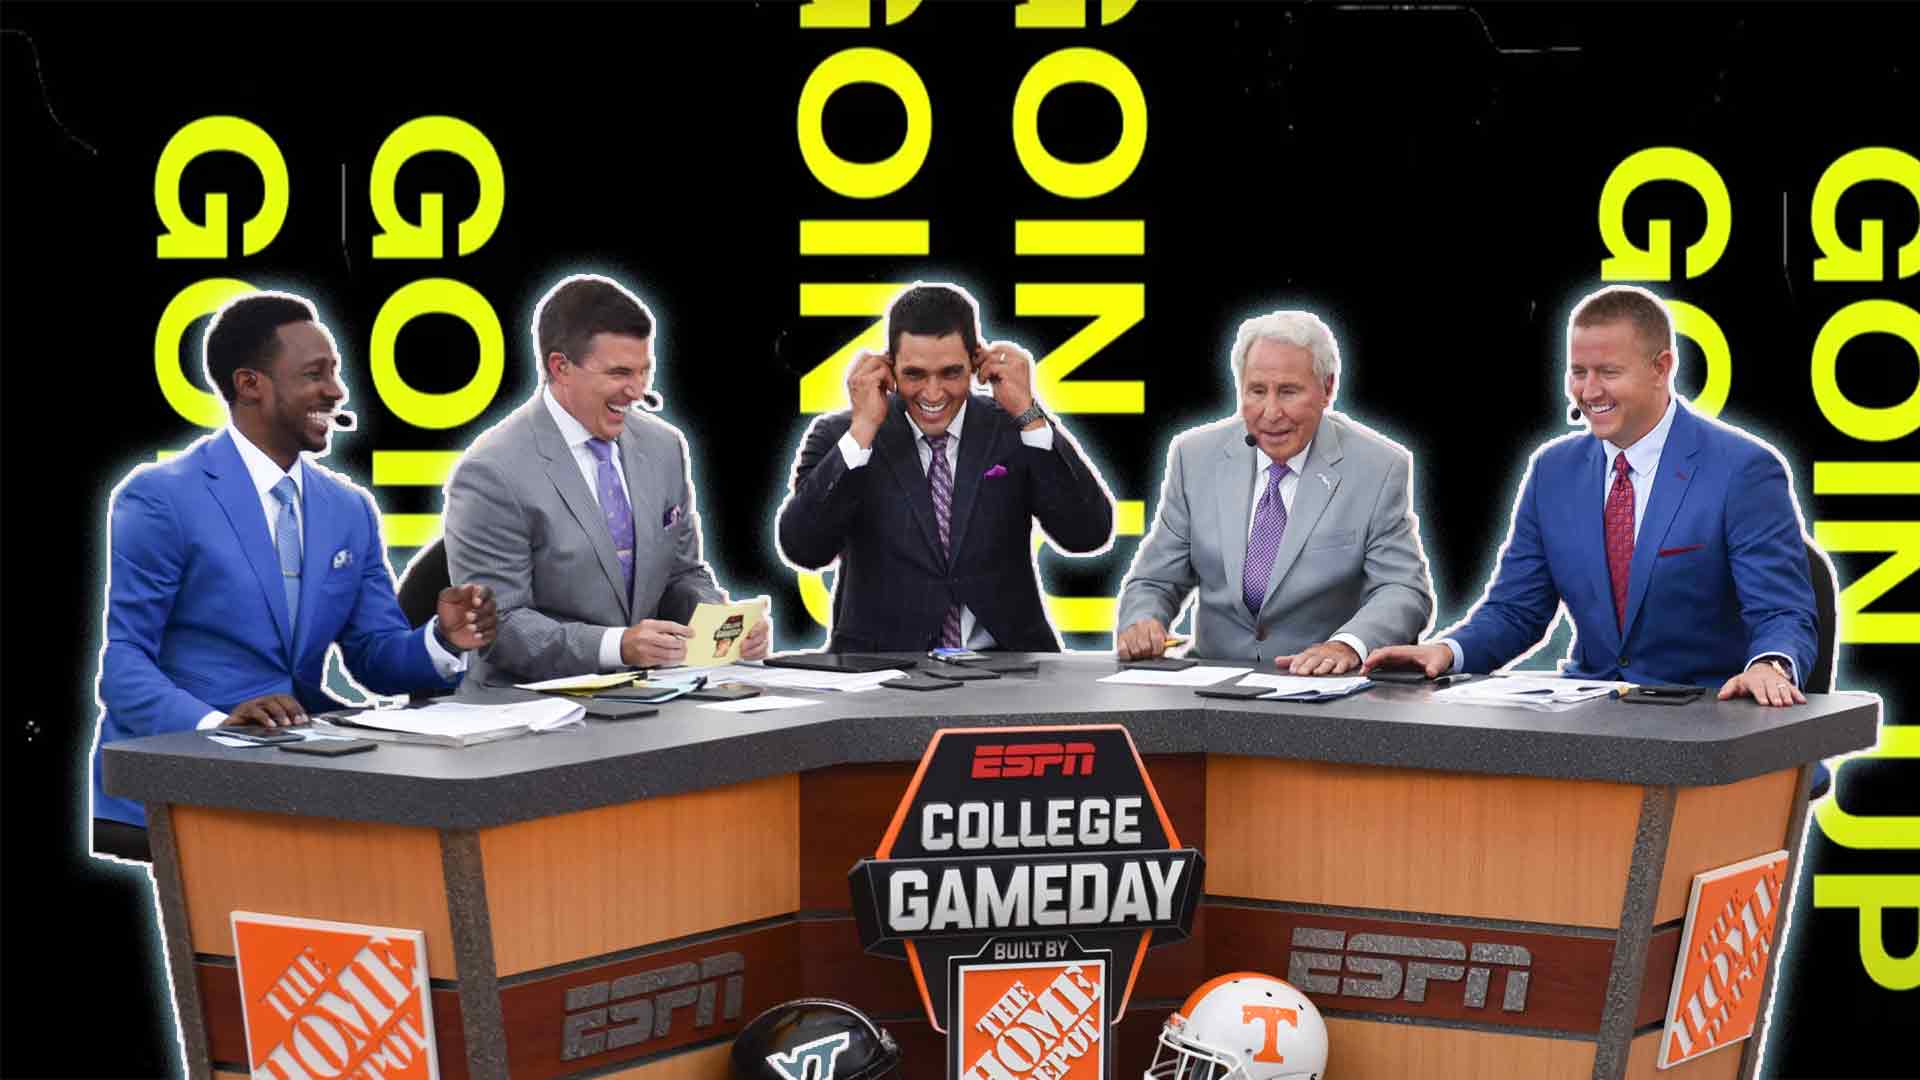 College Game Day Panel Cut Out on a Background from the Social Club Misfits Lyric Video of their song "UP!"